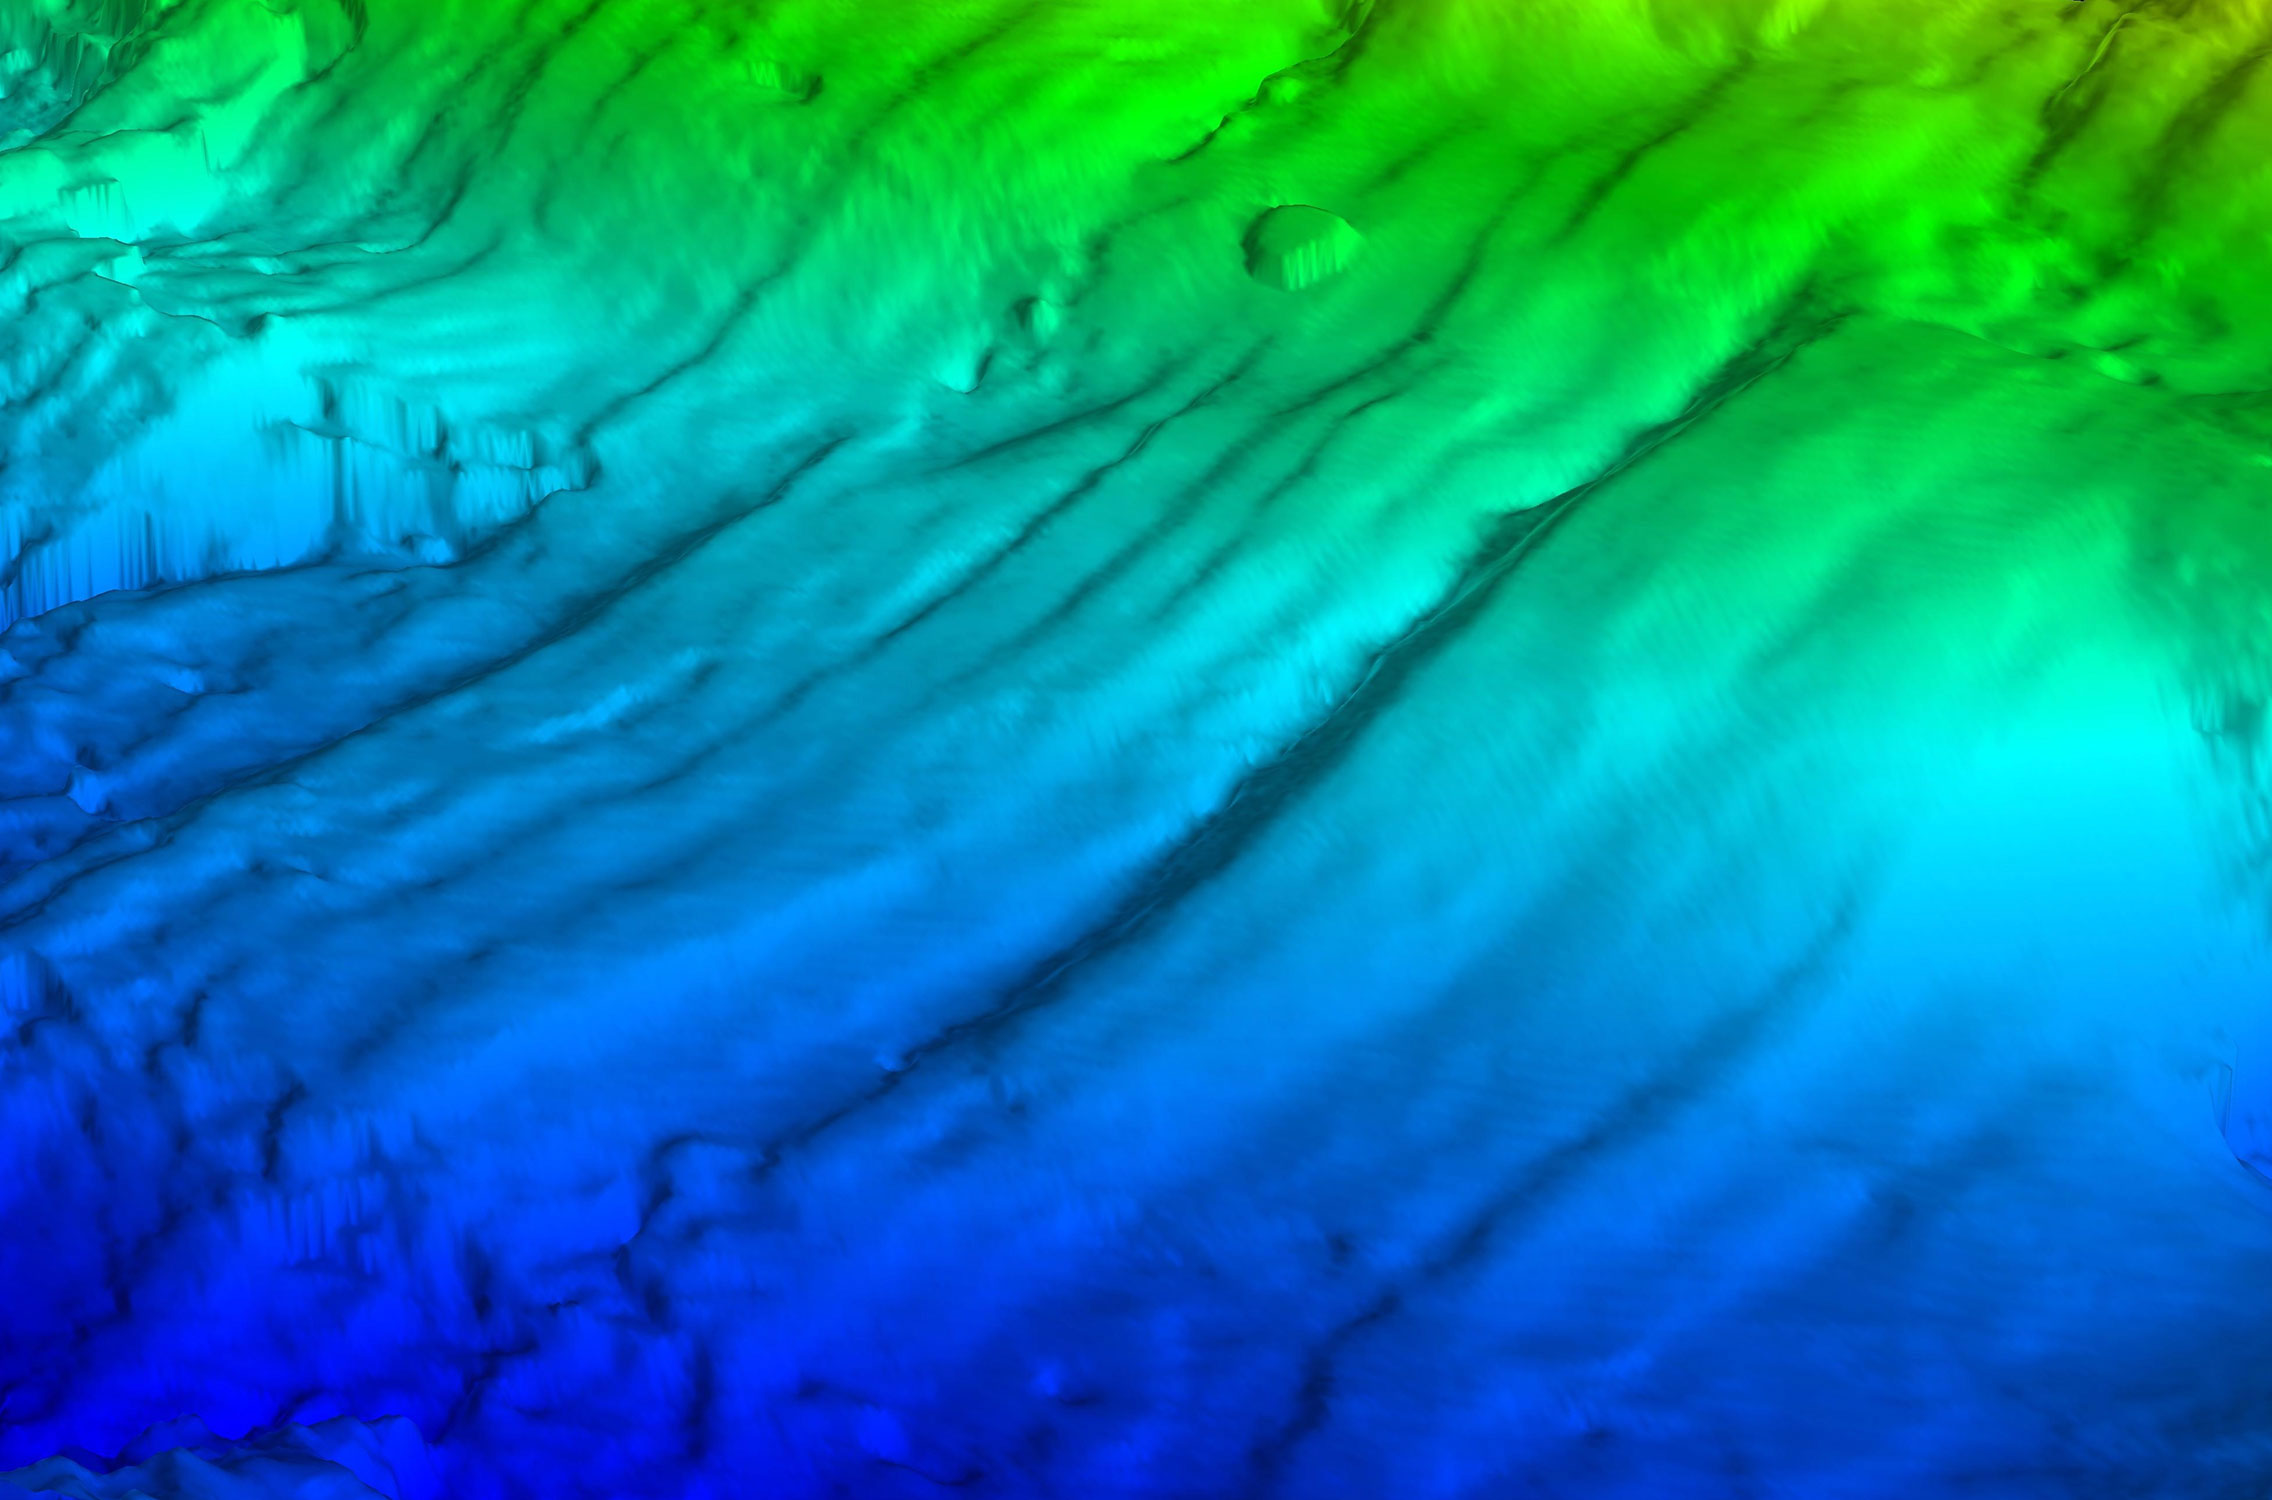 3-D computer image shows the seafloor has lots of grooves, in the Pacific Ocean south of Costa Rica.